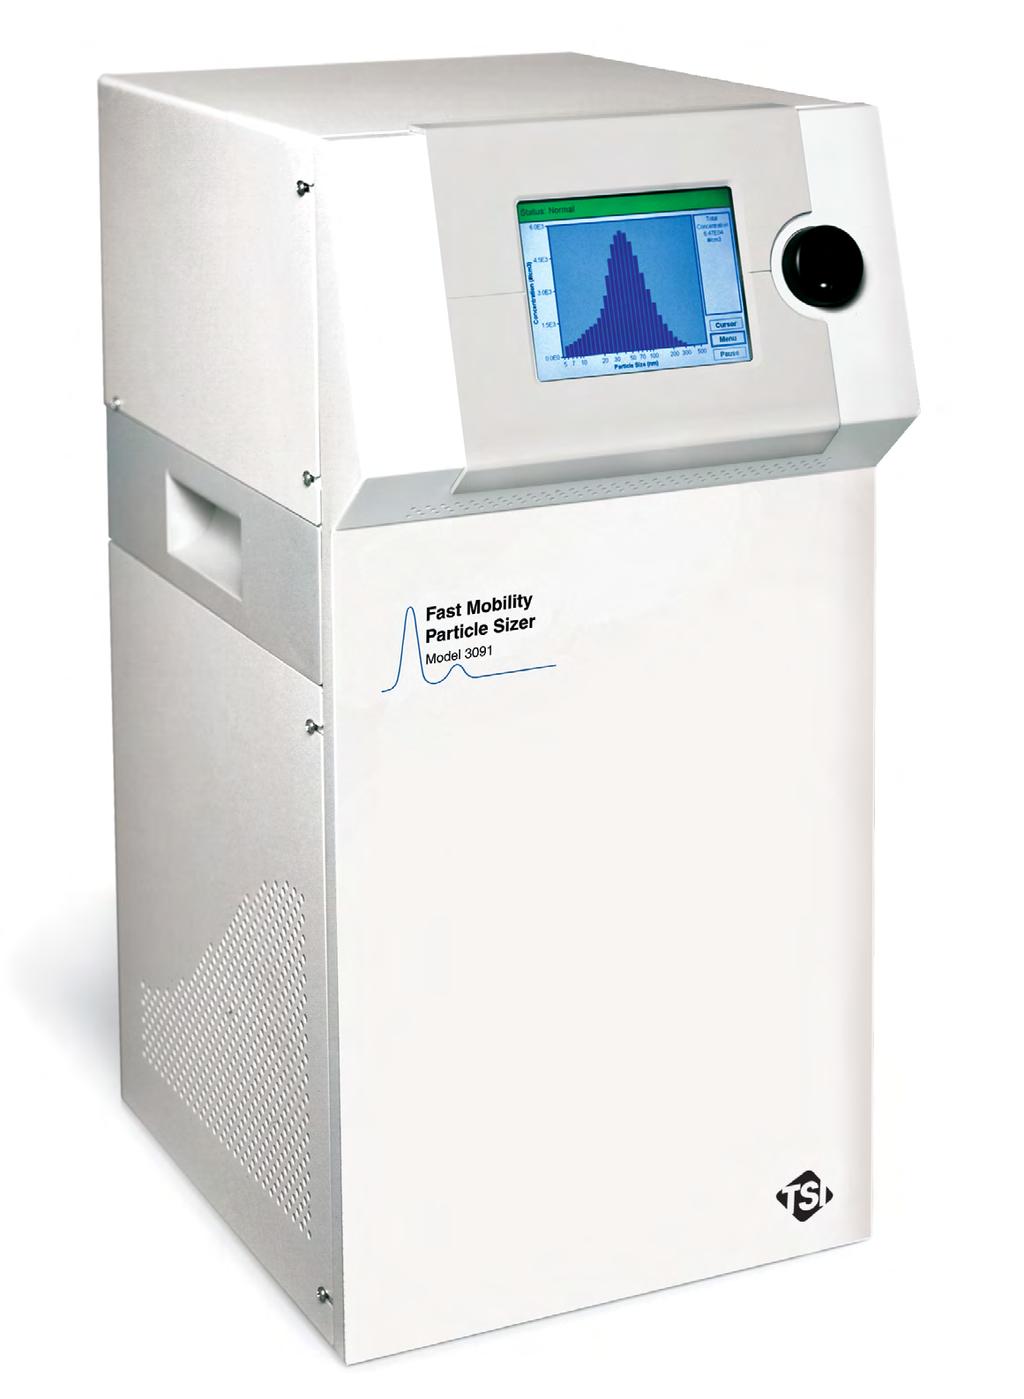 FAST MOBILITY PARTICLE SIZER SPECTROMETER MODEL 3091 MEASURES SIZE DISTRIBUTION AND NUMBER